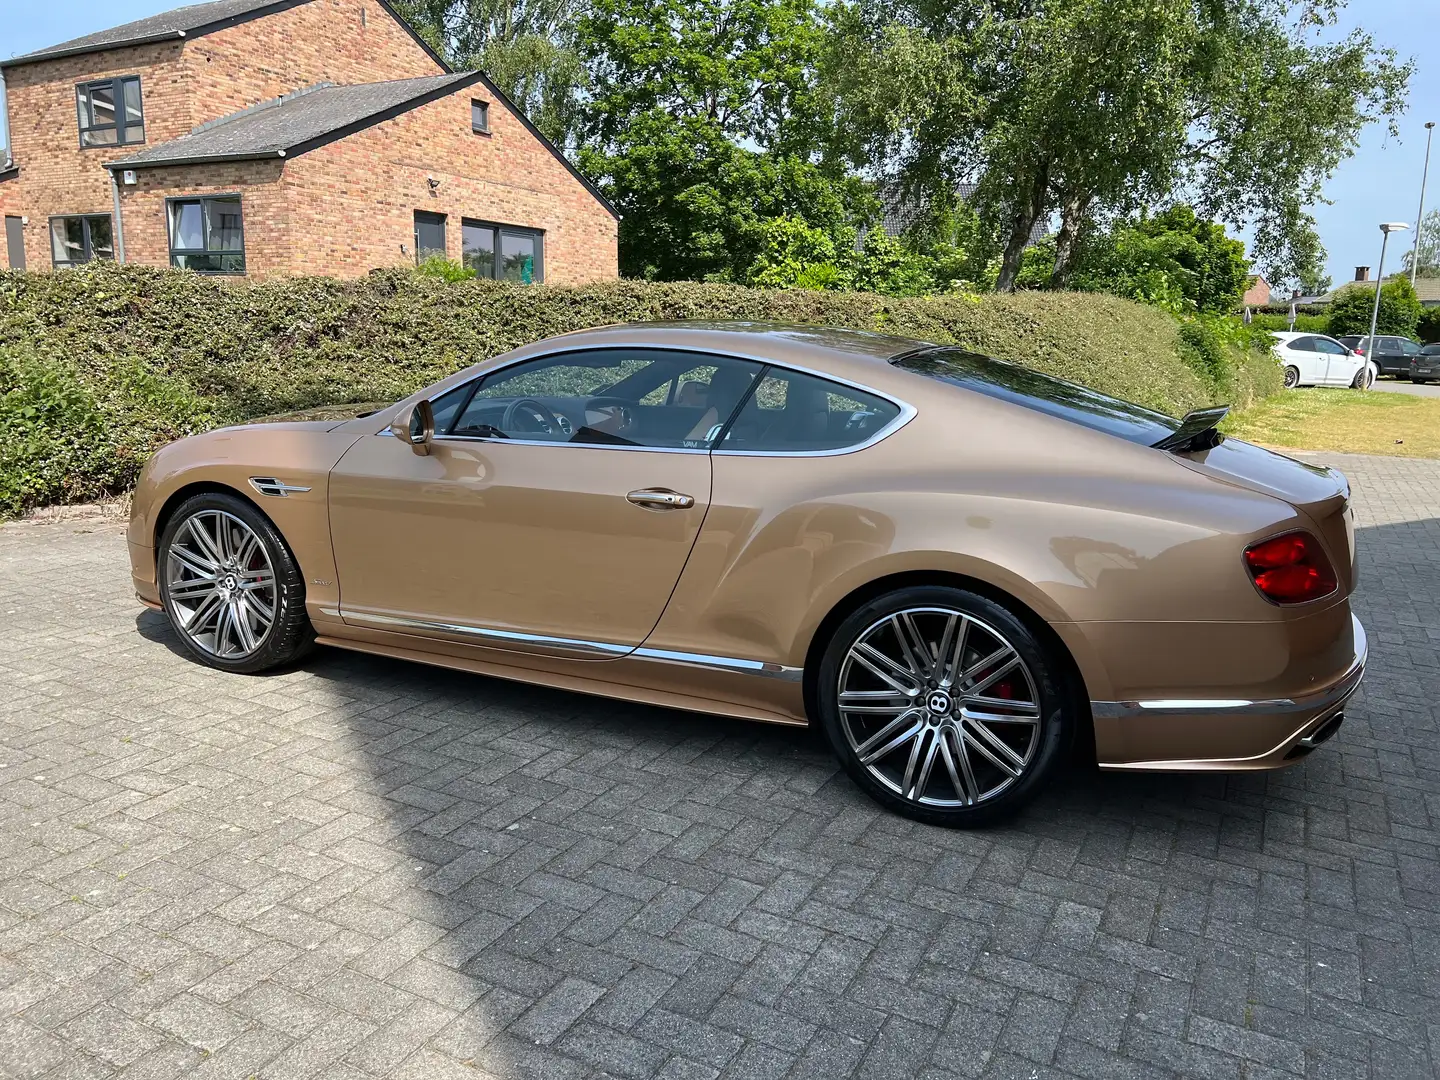 Bentley Continental GT SPEED W12 LIMITED 1 OF 21 GOLD NEUF 1PROPRIO ! Goud - 2